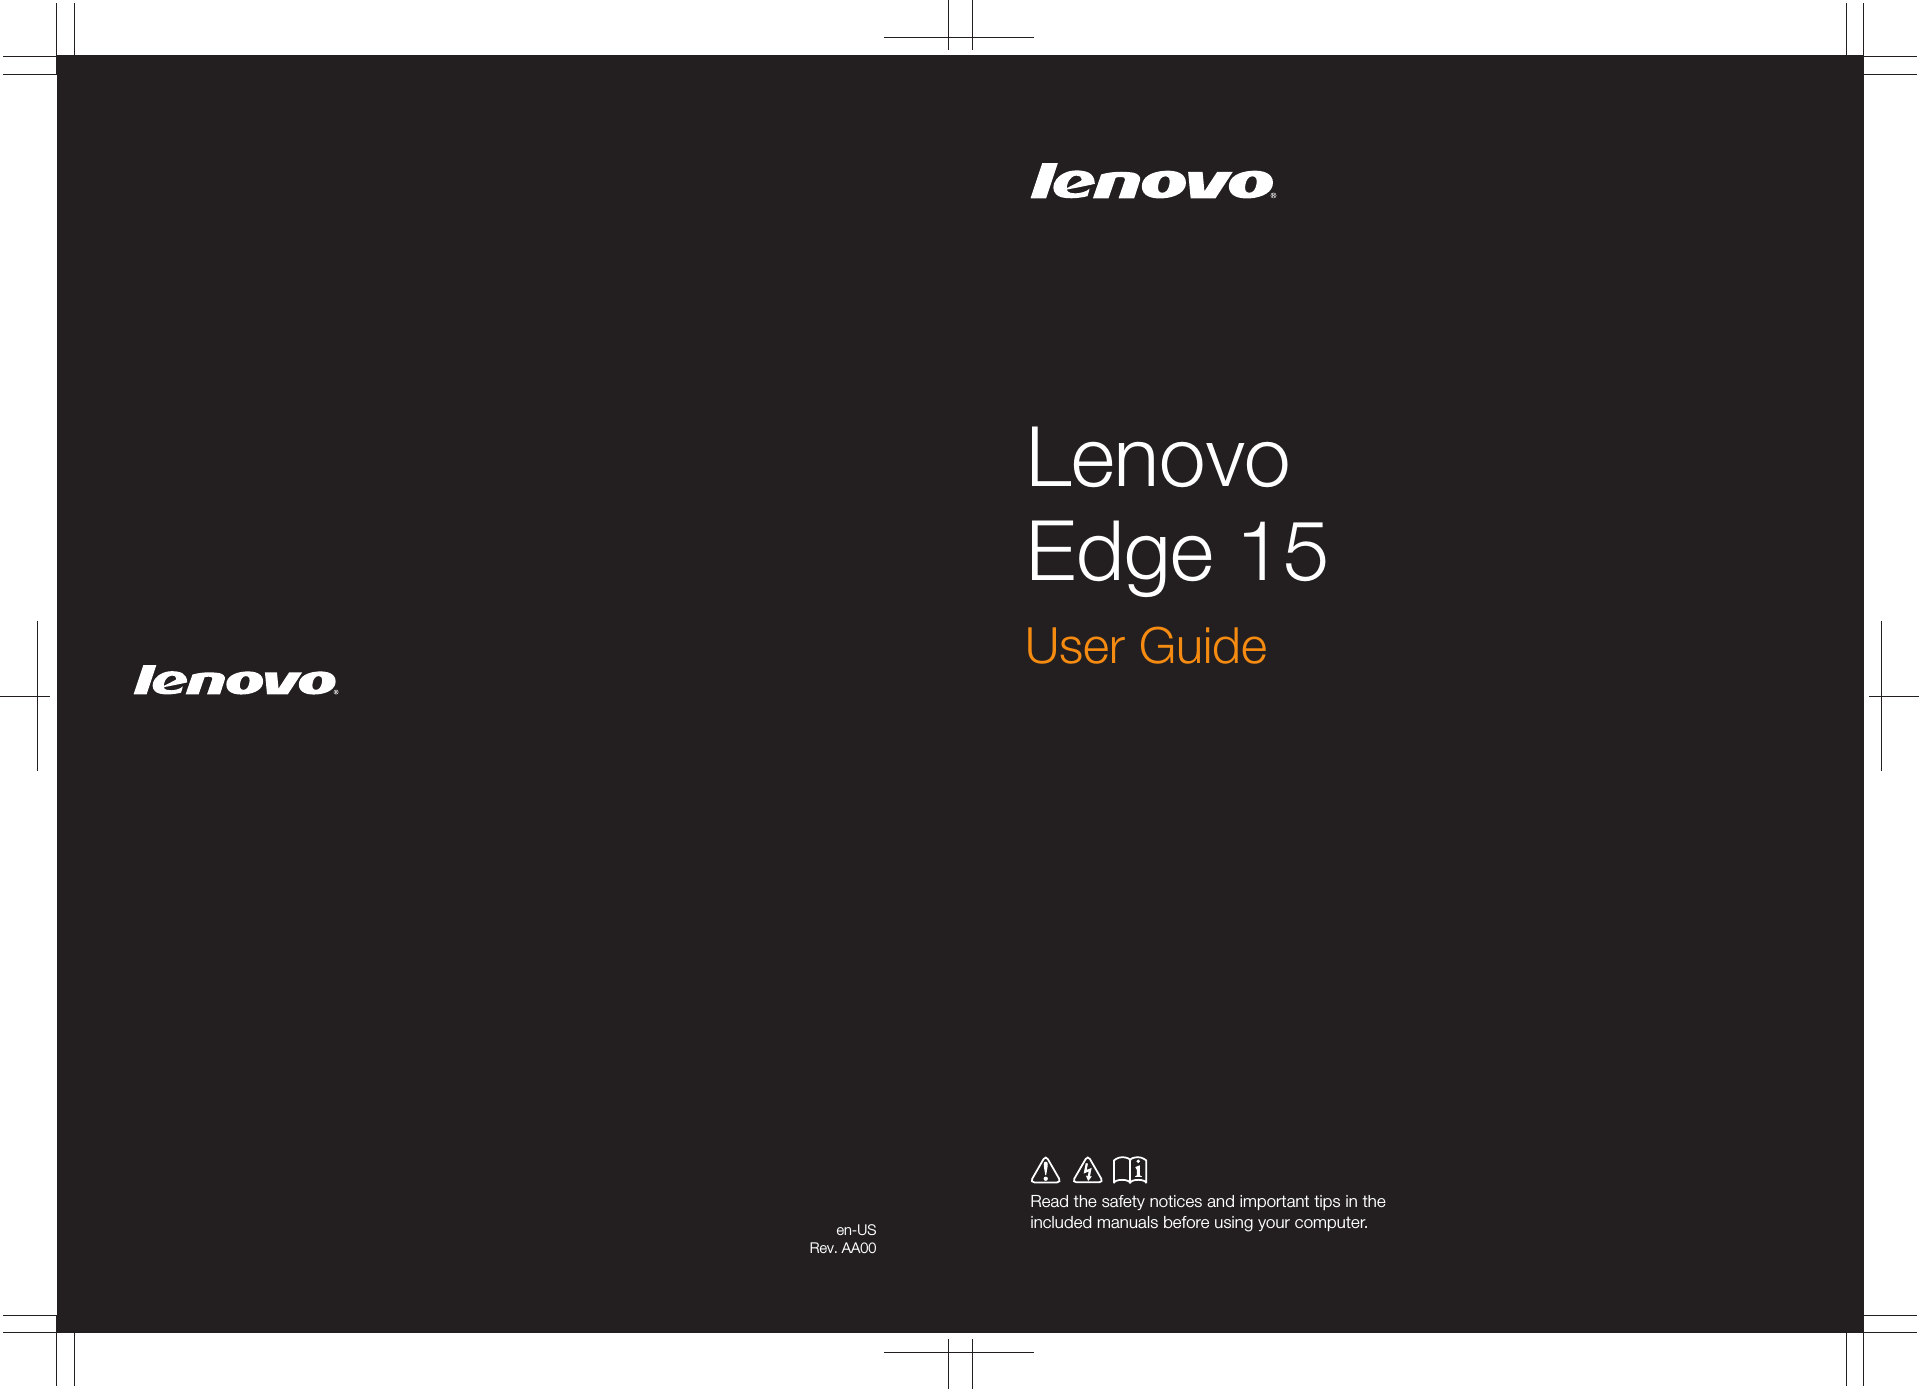 Lenovo Edge 15Read the safety notices and important tips in the included manuals before using your computer.en-USRev. AA00User Guide